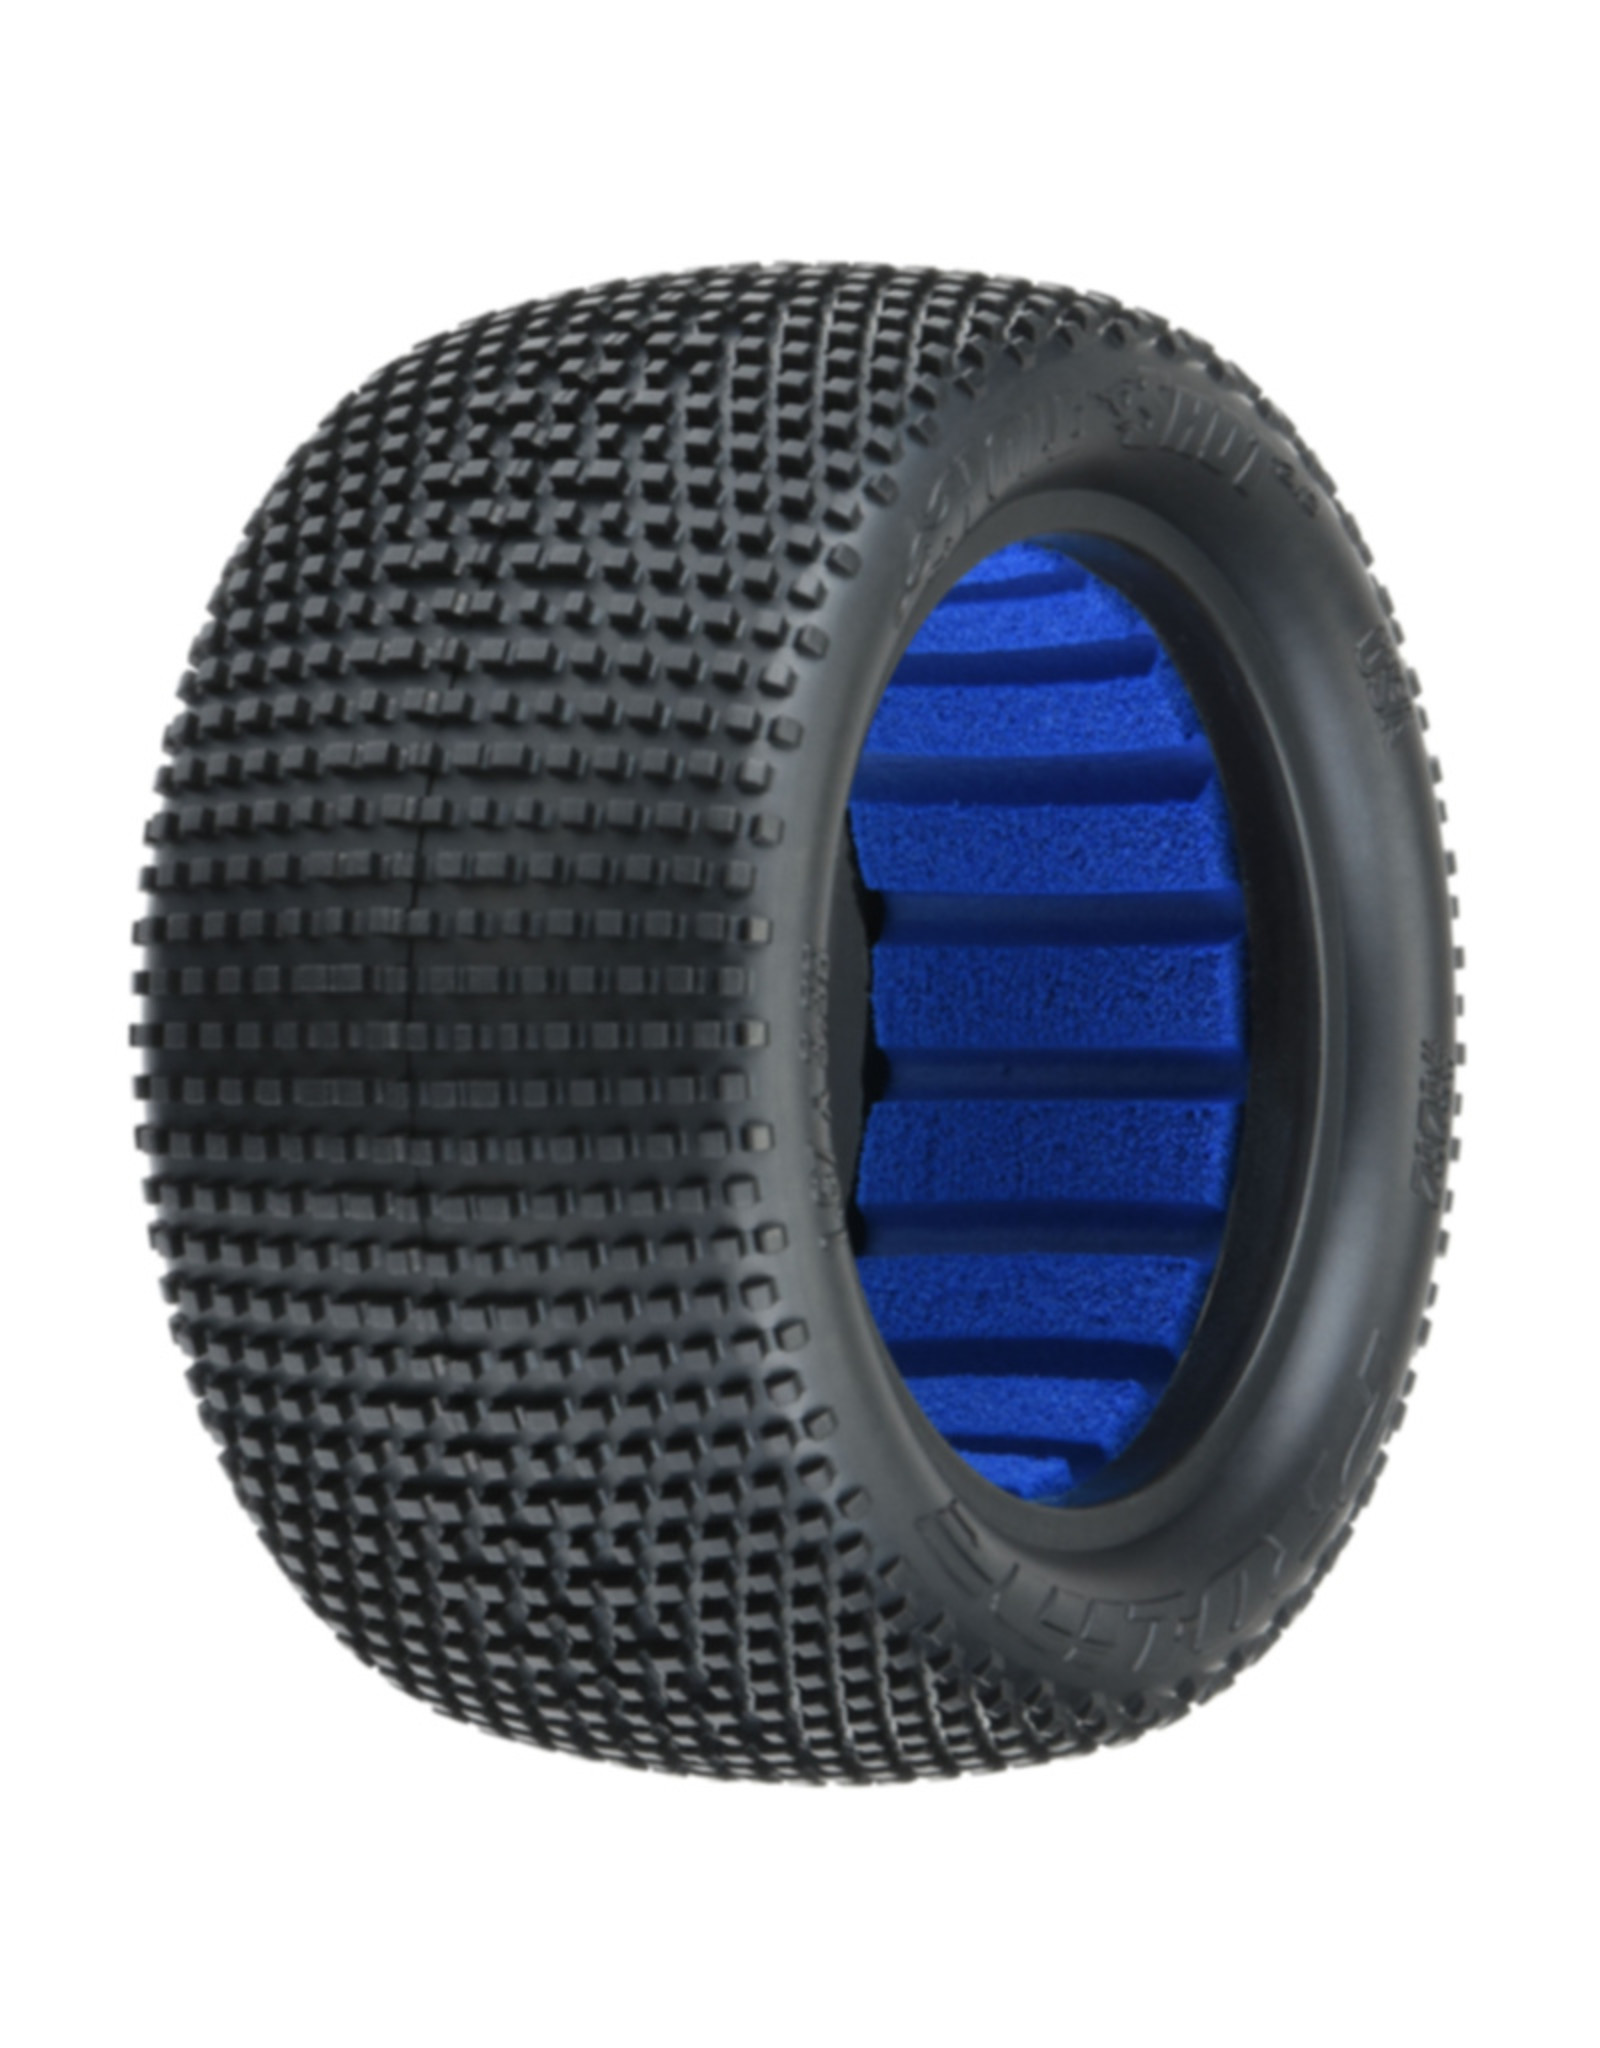 Pro-Line Racing PRO828203 Hole Shot 3.0 2.2" M4 Buggy Rear Tires